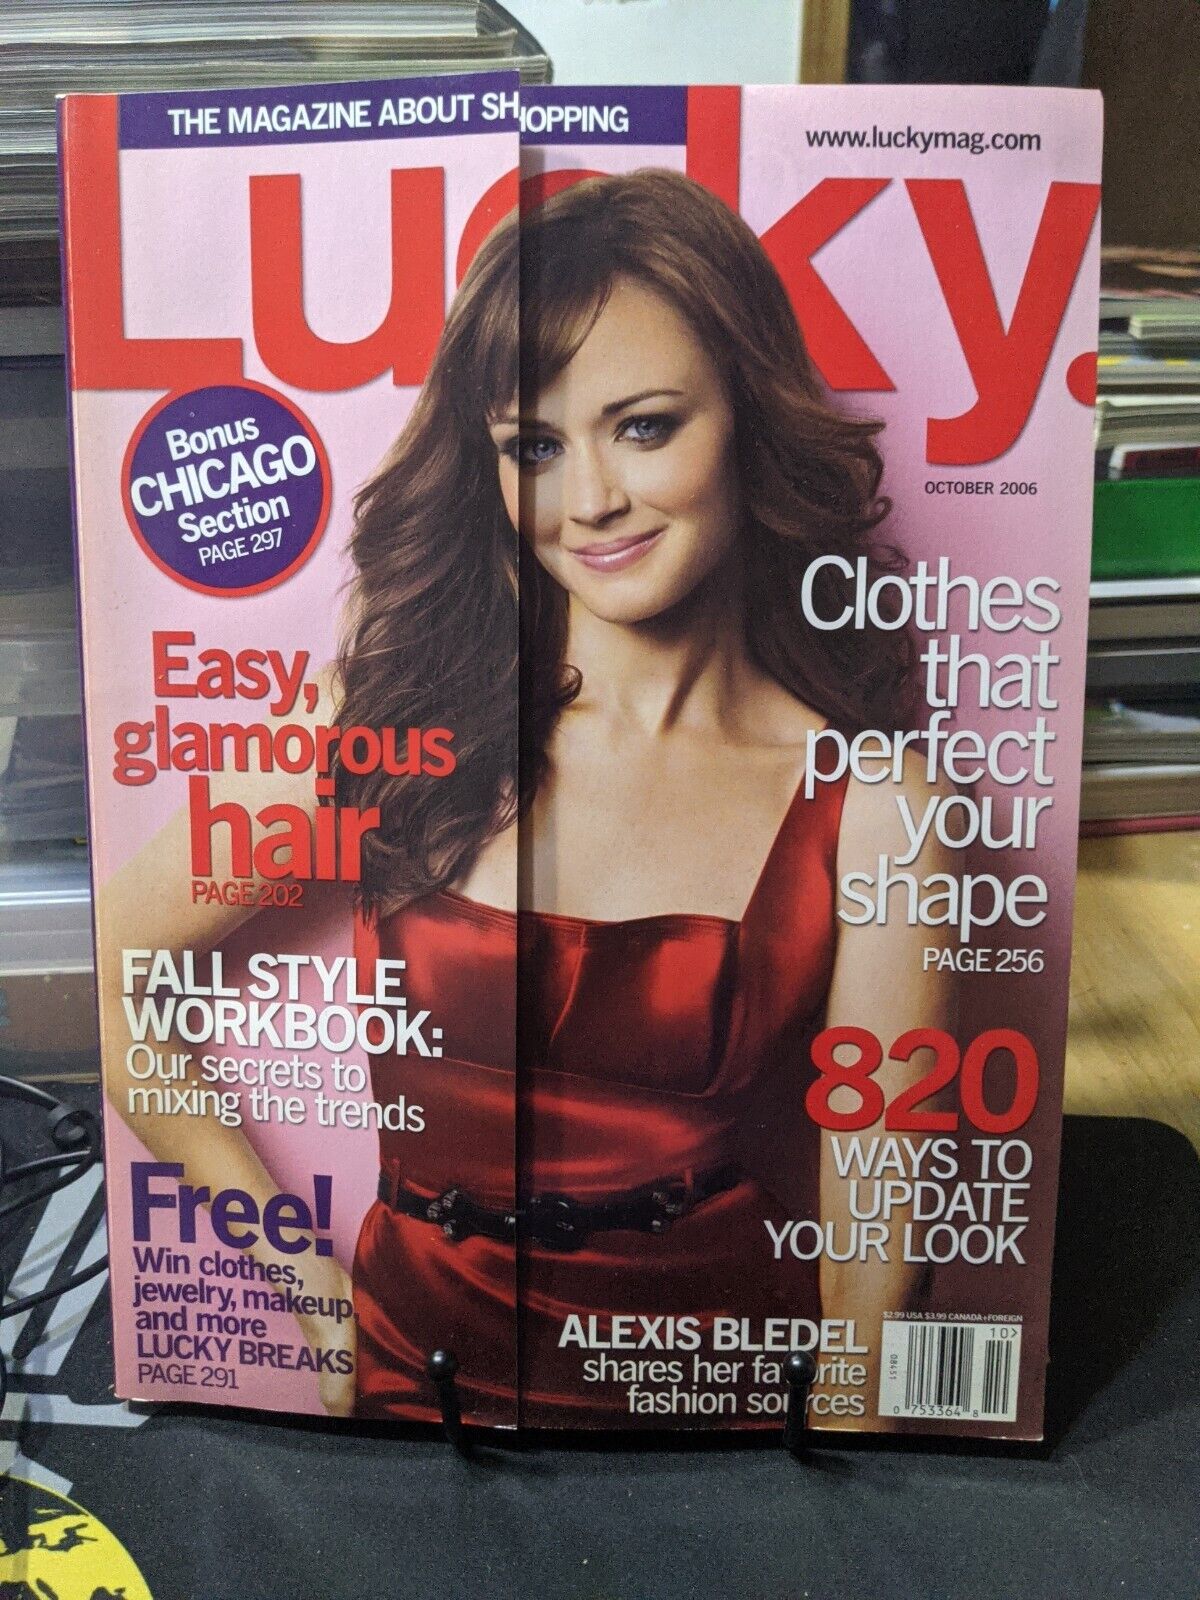 Lucky Oct 2006 Alexis Bledel; Great Bags; Glamorous Hair ID:62262 | eBay